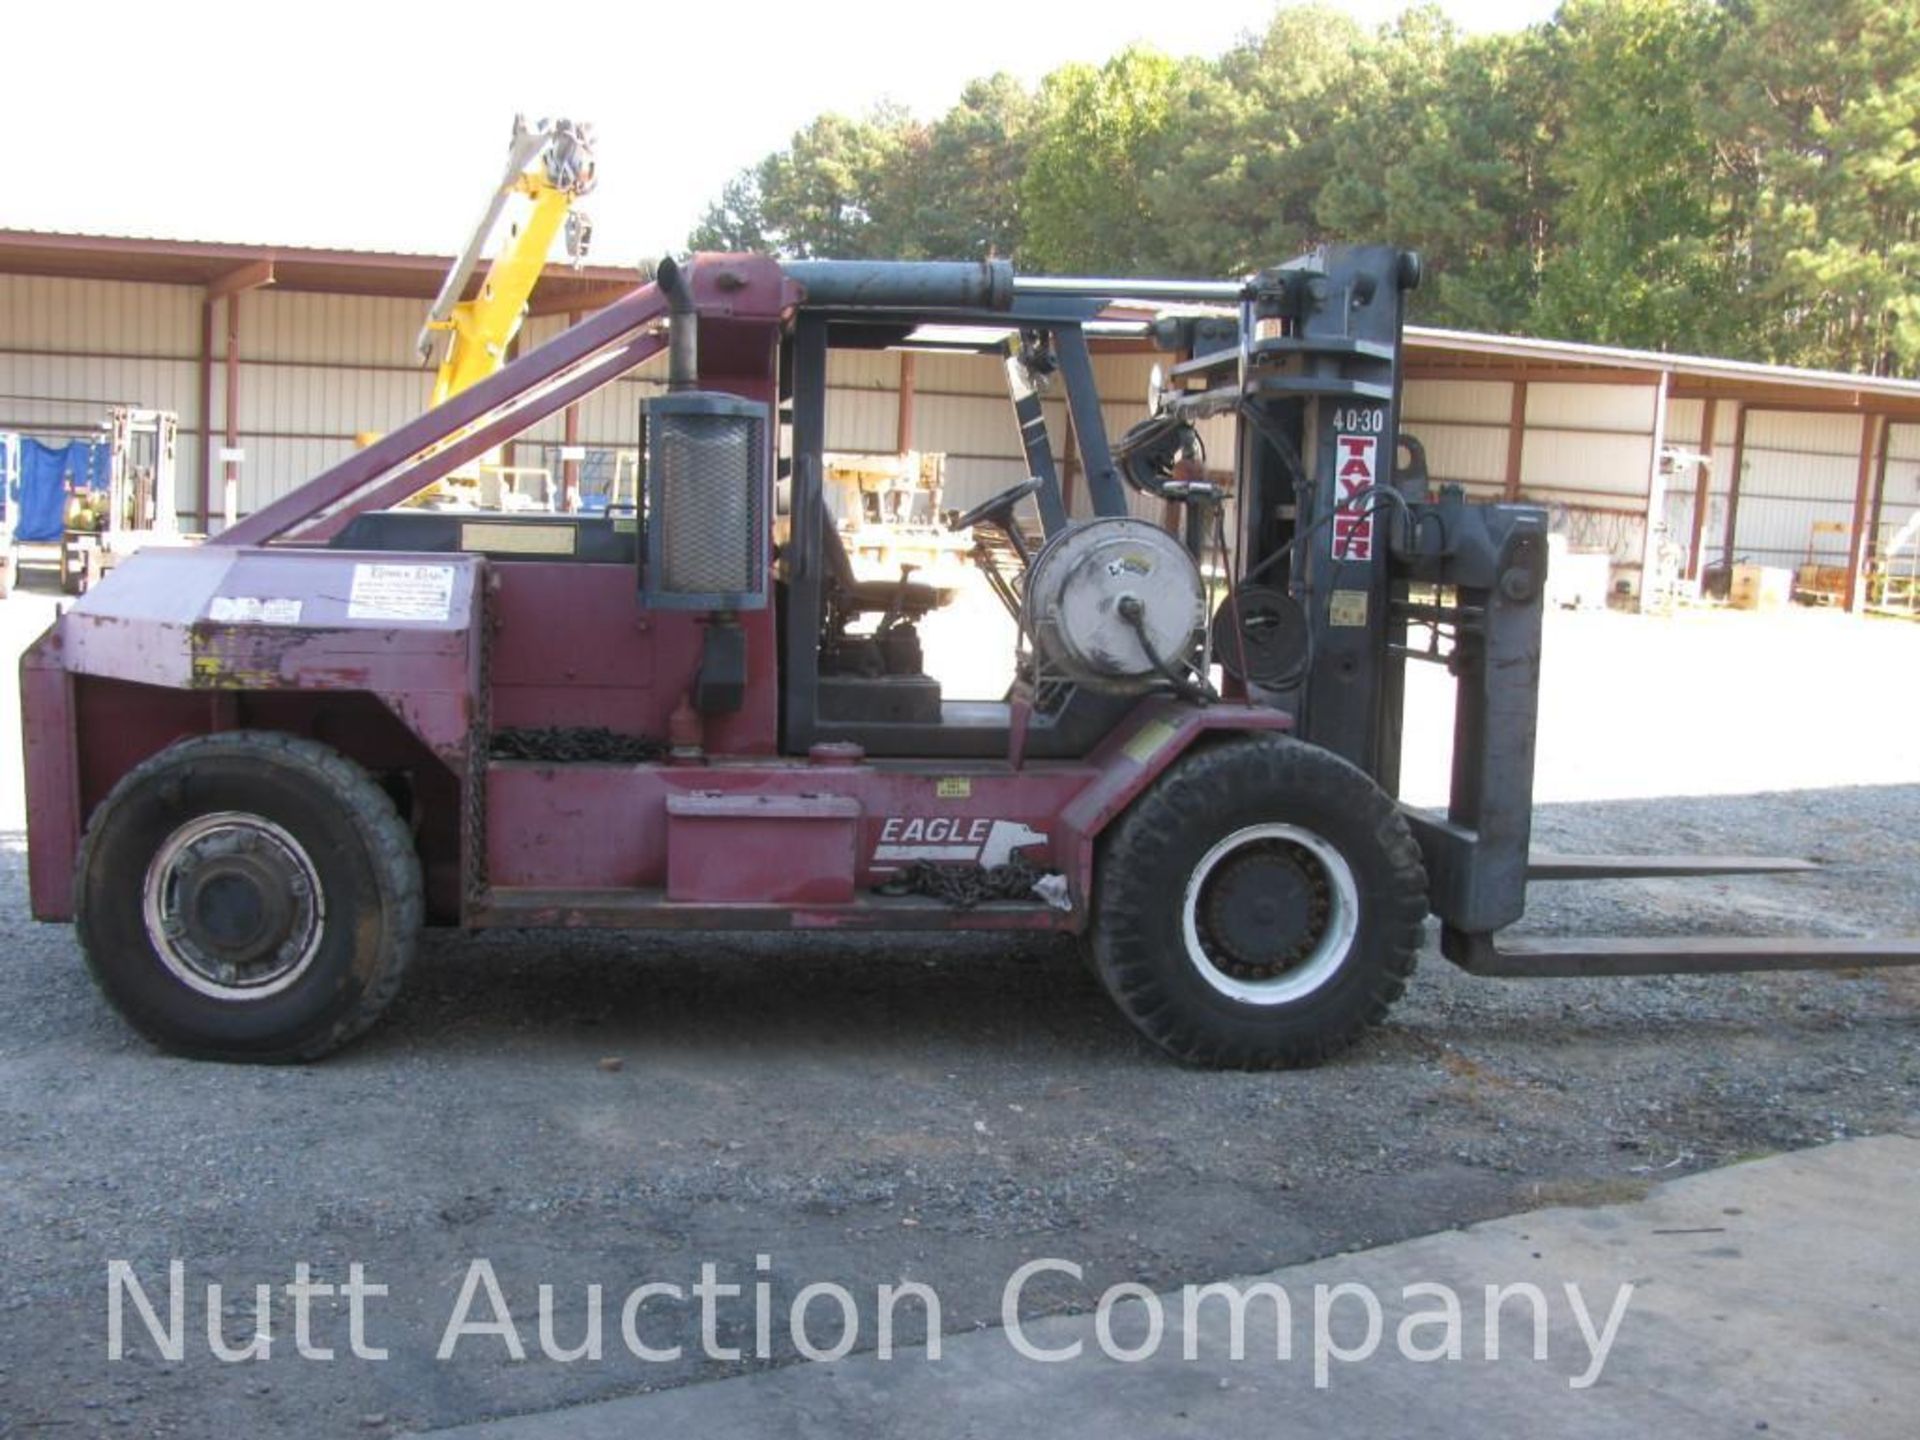 Taylor TE 40-30 Eagle Forklift Serial: S-P2-26106, Engine: Cummins Diesel, Hours: 1729 W/Extra - Image 22 of 28